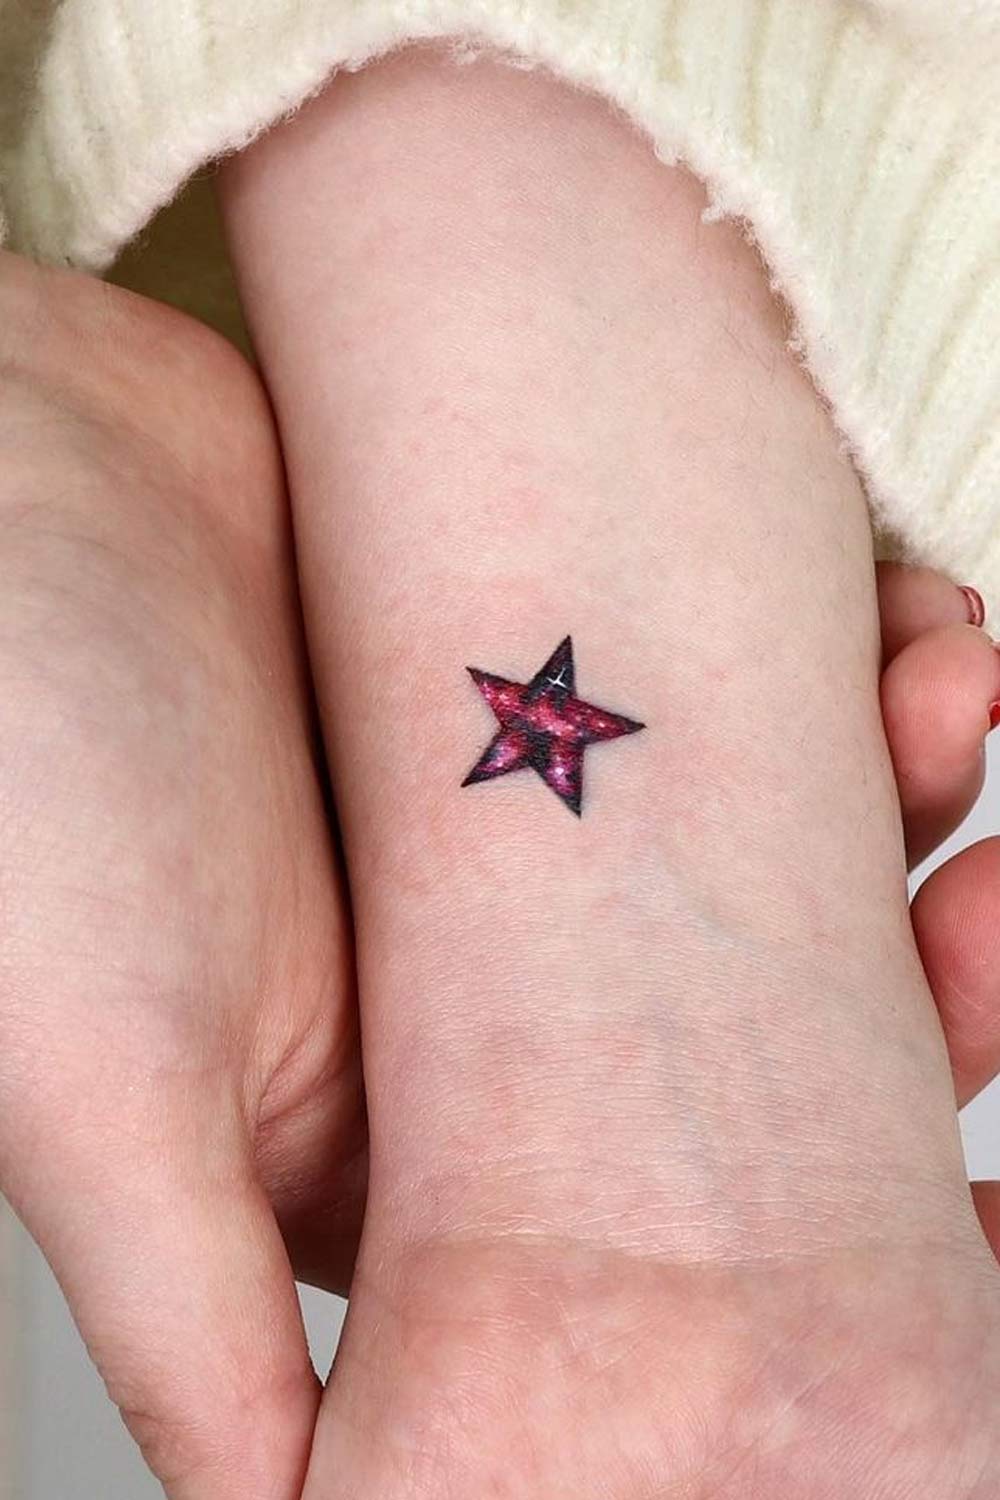 The Meaning and Symbolism of Star Tattoos